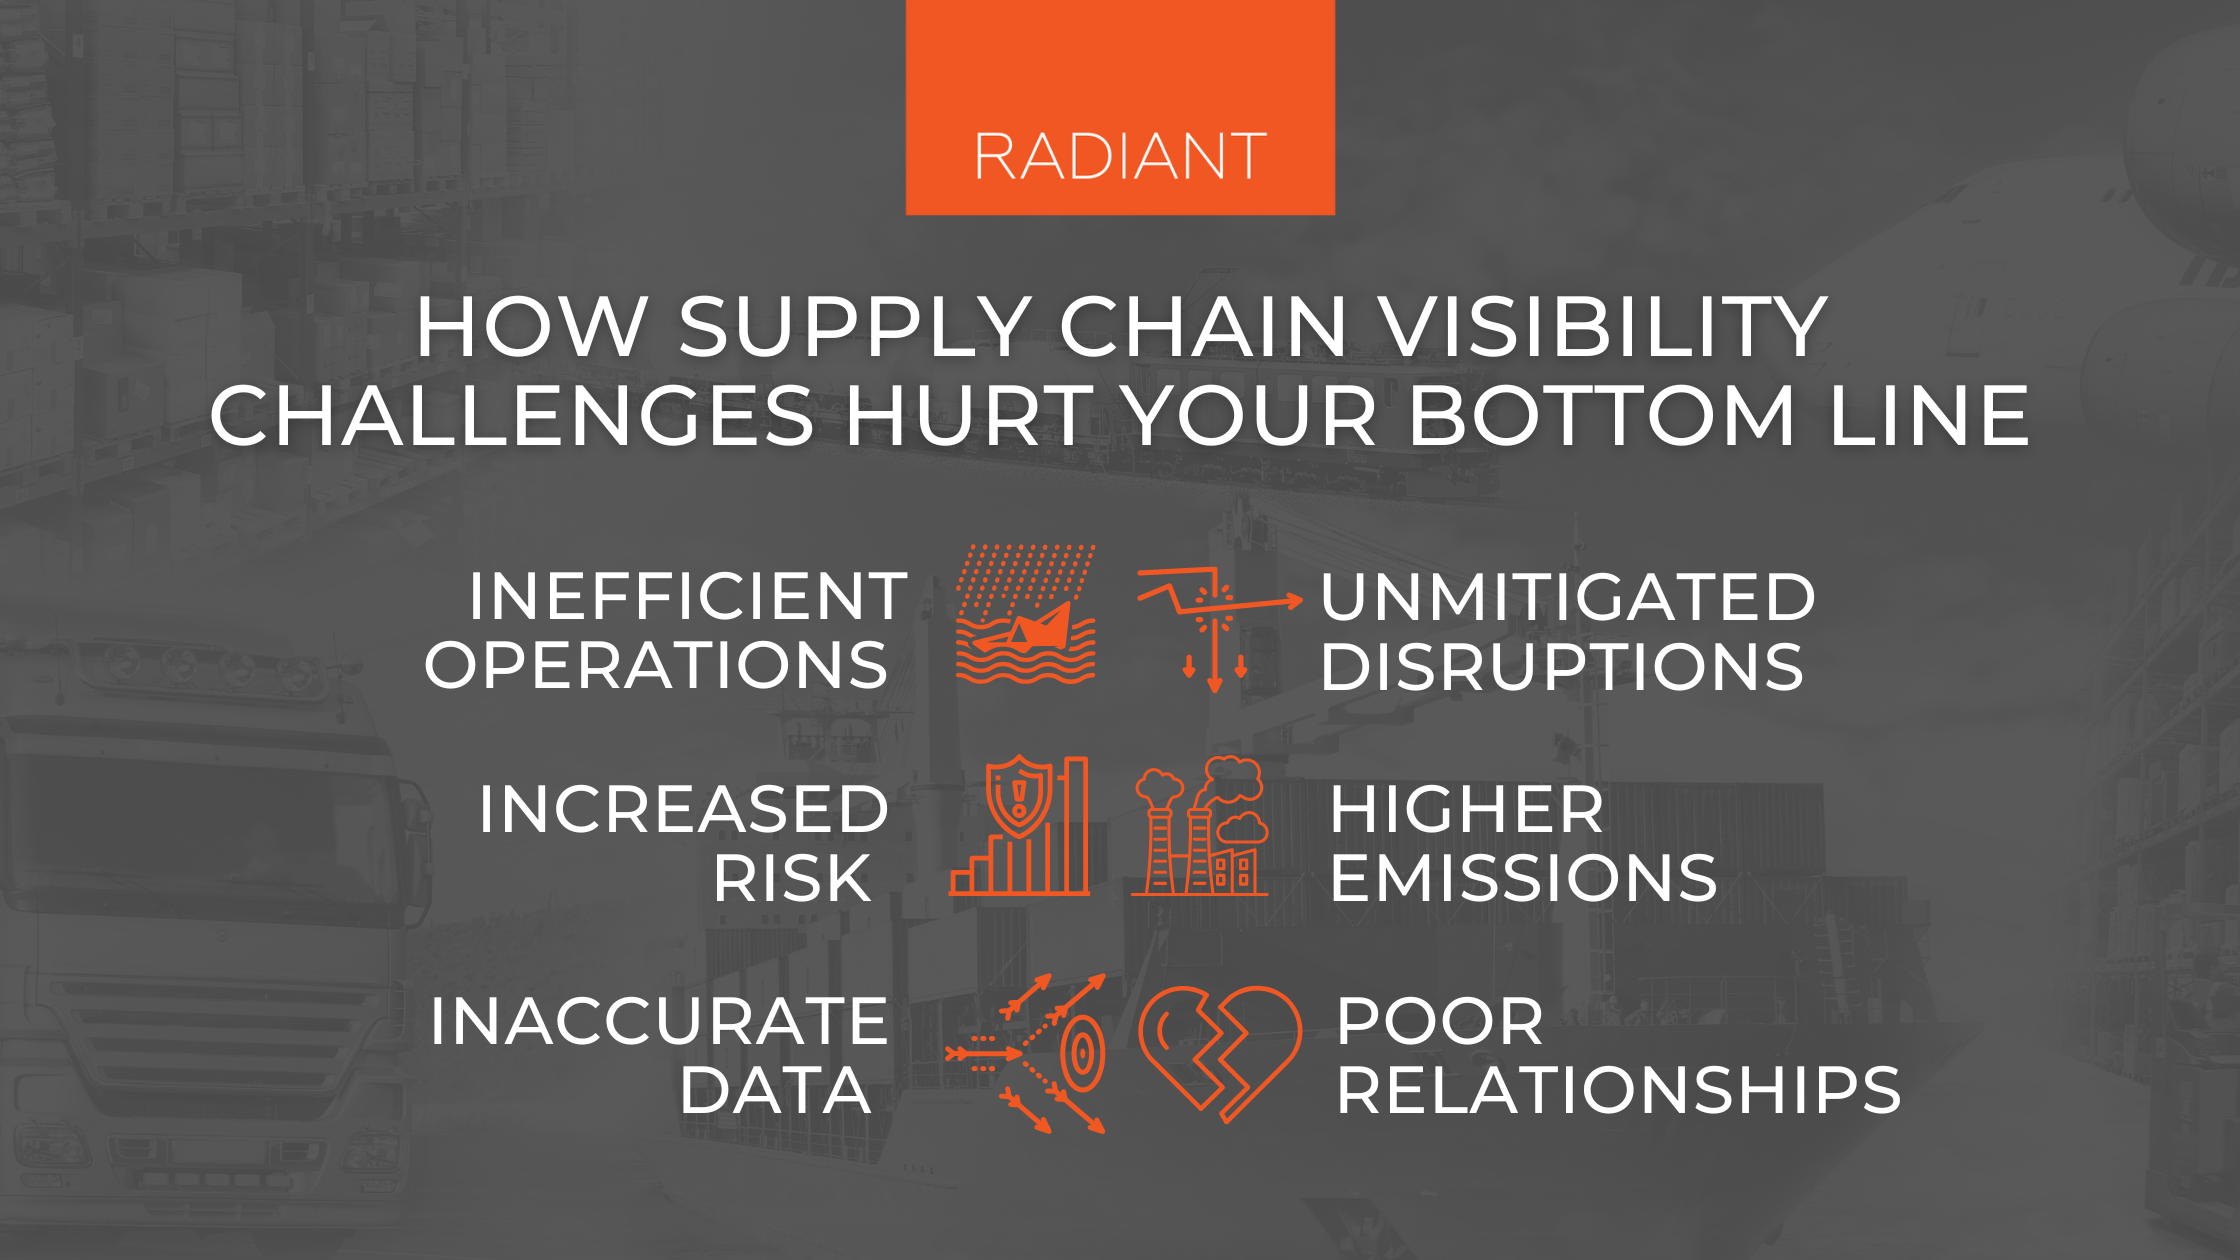 Lack Of Supply Chain Visibility - Increasing Supply Chain Visibility - How To Improve Supply Chain Visibility - Supply Chain Visibility Technology - Supply Chain Management And Logistics - Logistics And Supply Chain Management - Supply Chain Logistics - Lack Of Visibility In Supply Chain - Supply Chain Visibility Challenges